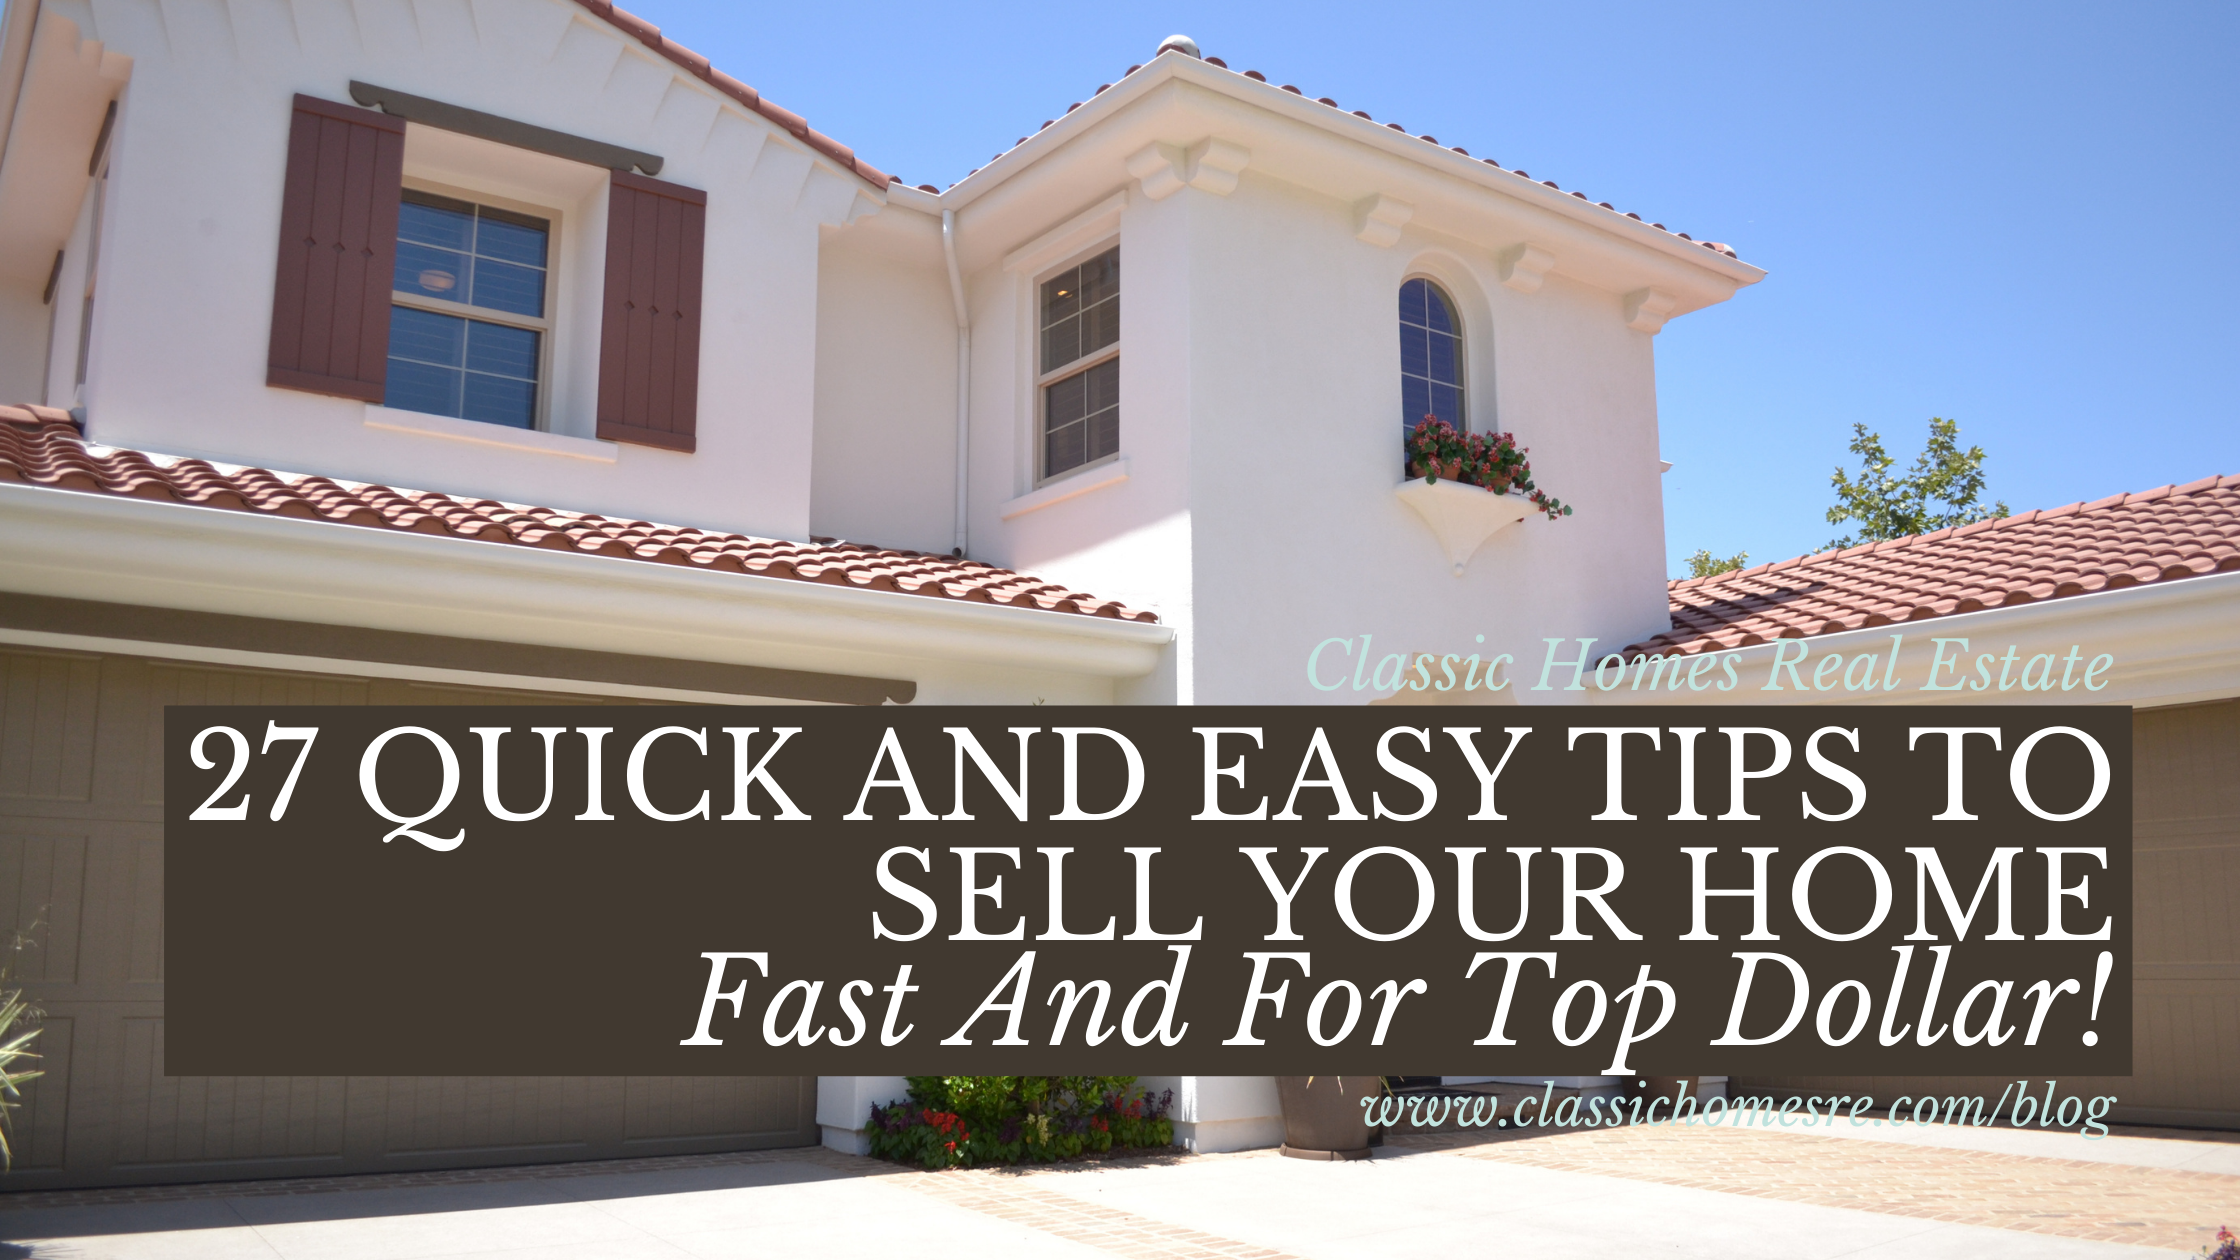 27 Quick Tips to Sell Your Home Fast and for Top Dollar! - Classic Homes Real Estate